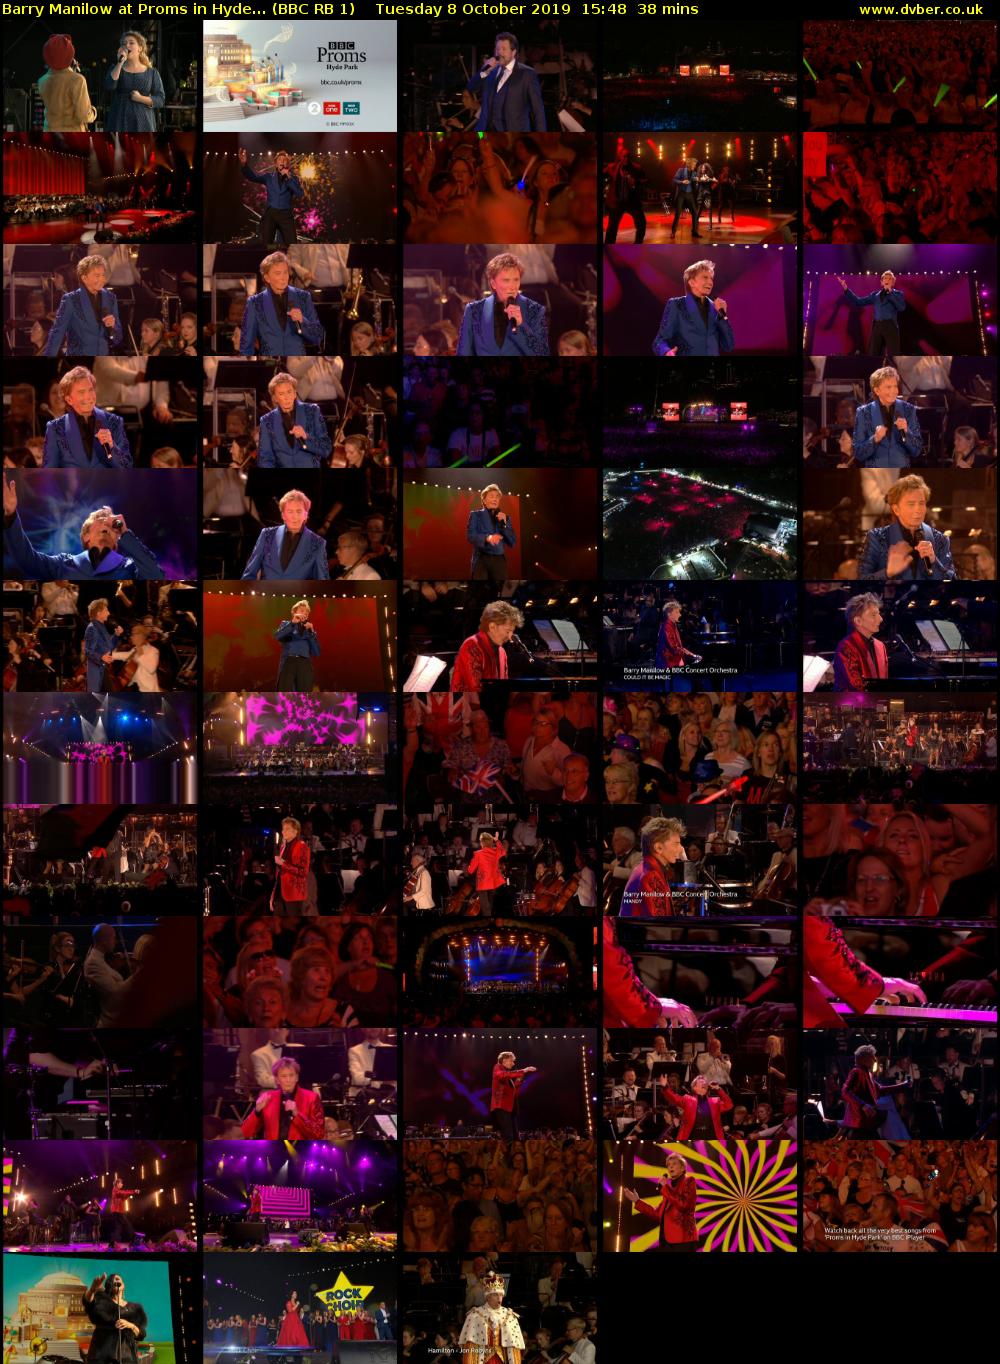 Barry Manilow at Proms in Hyde... (BBC RB 1) Tuesday 8 October 2019 15:48 - 16:26